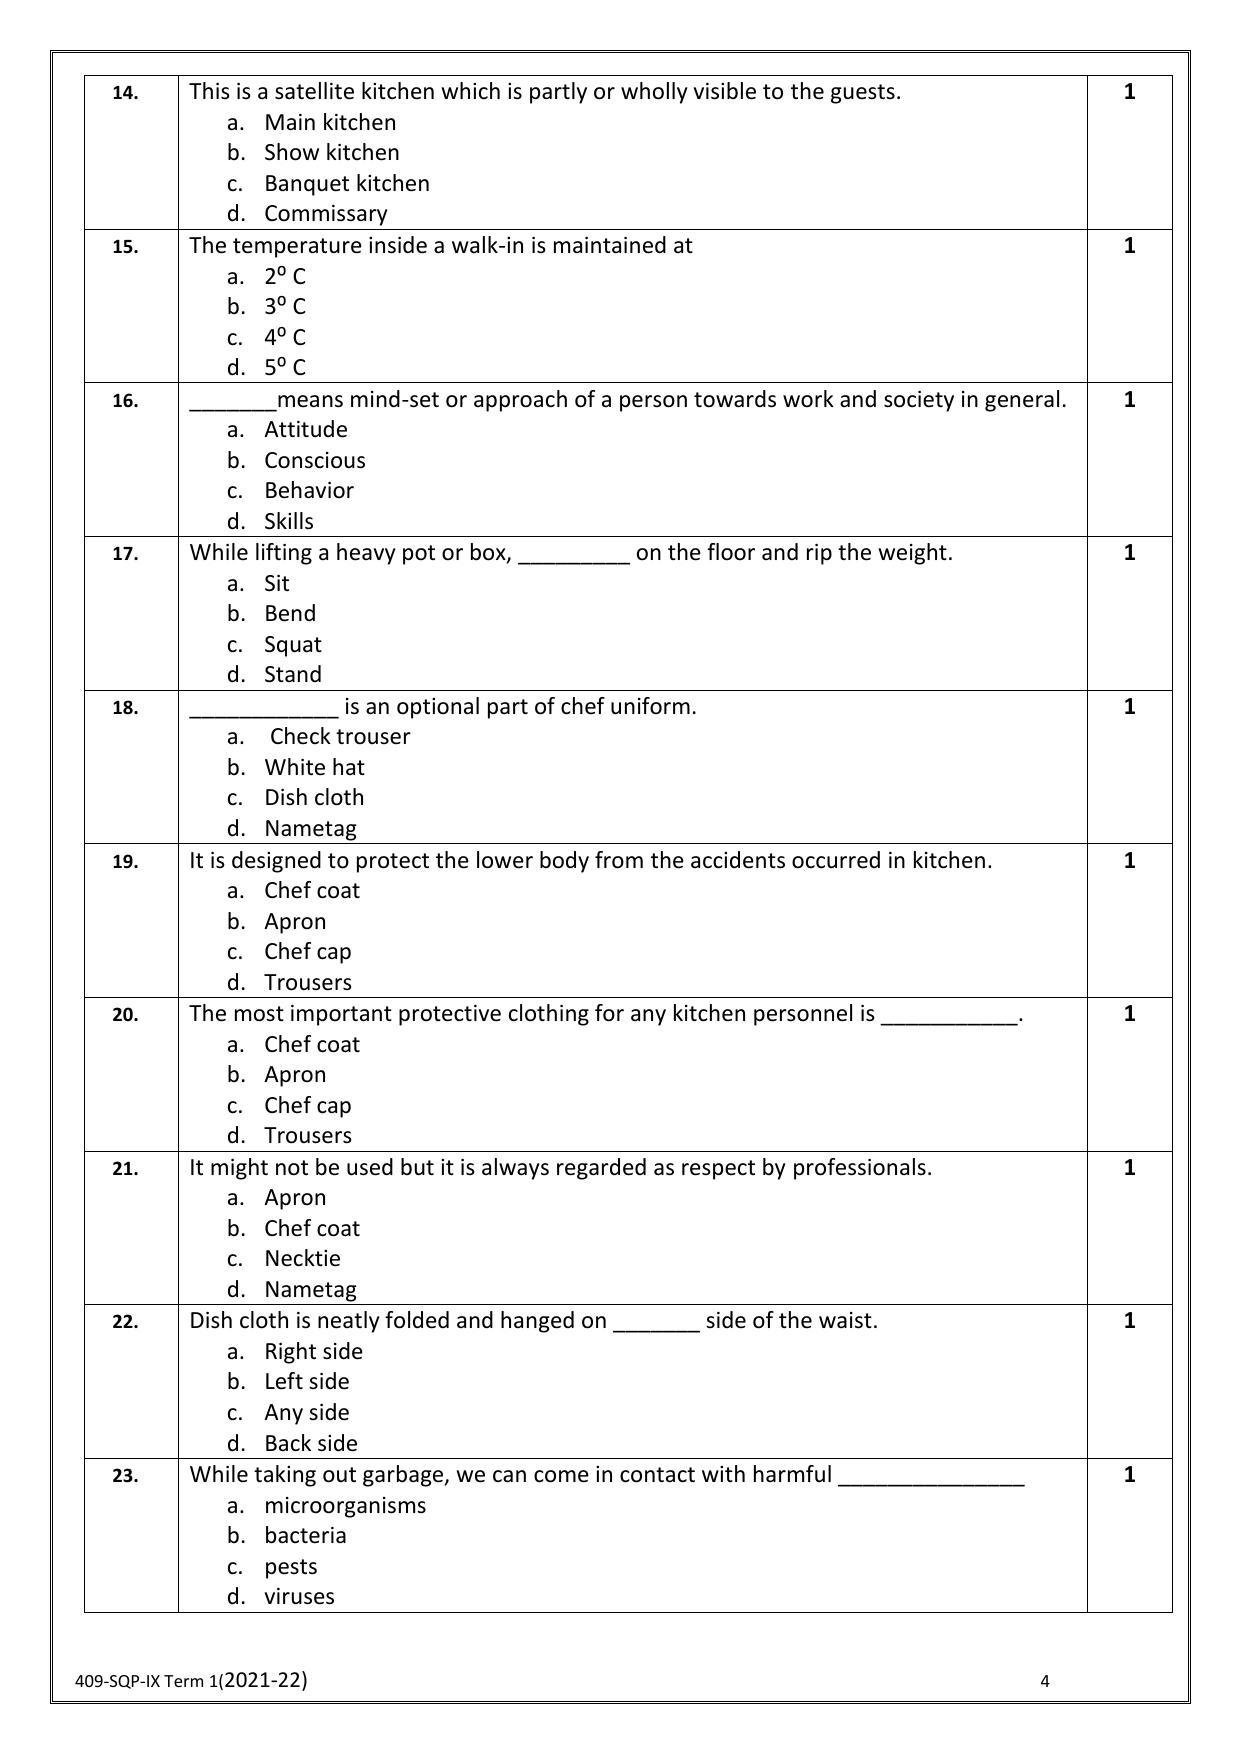 CBSE Class 10 Skill Education (Term I) - Food Production Sample Paper 2021-22 - Page 4